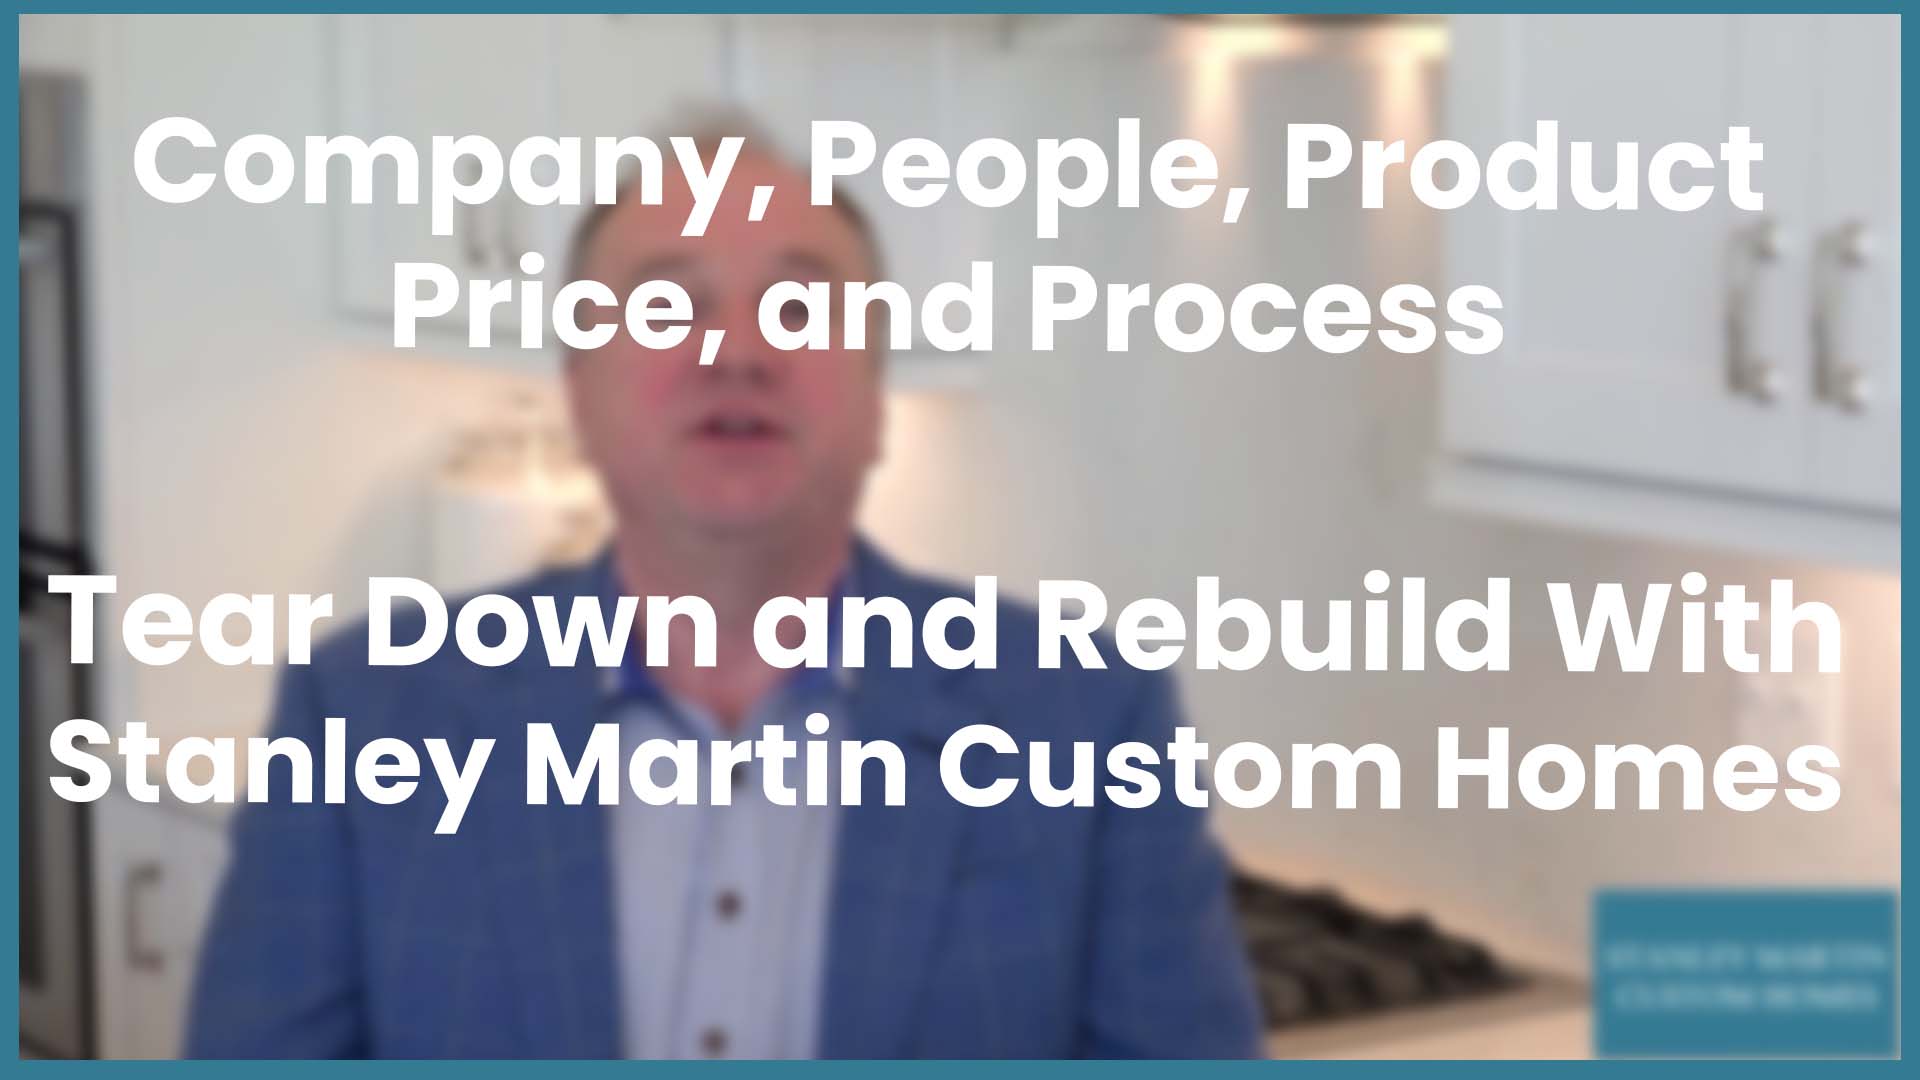 Information from John Jorgenson | Company People Product Price Process